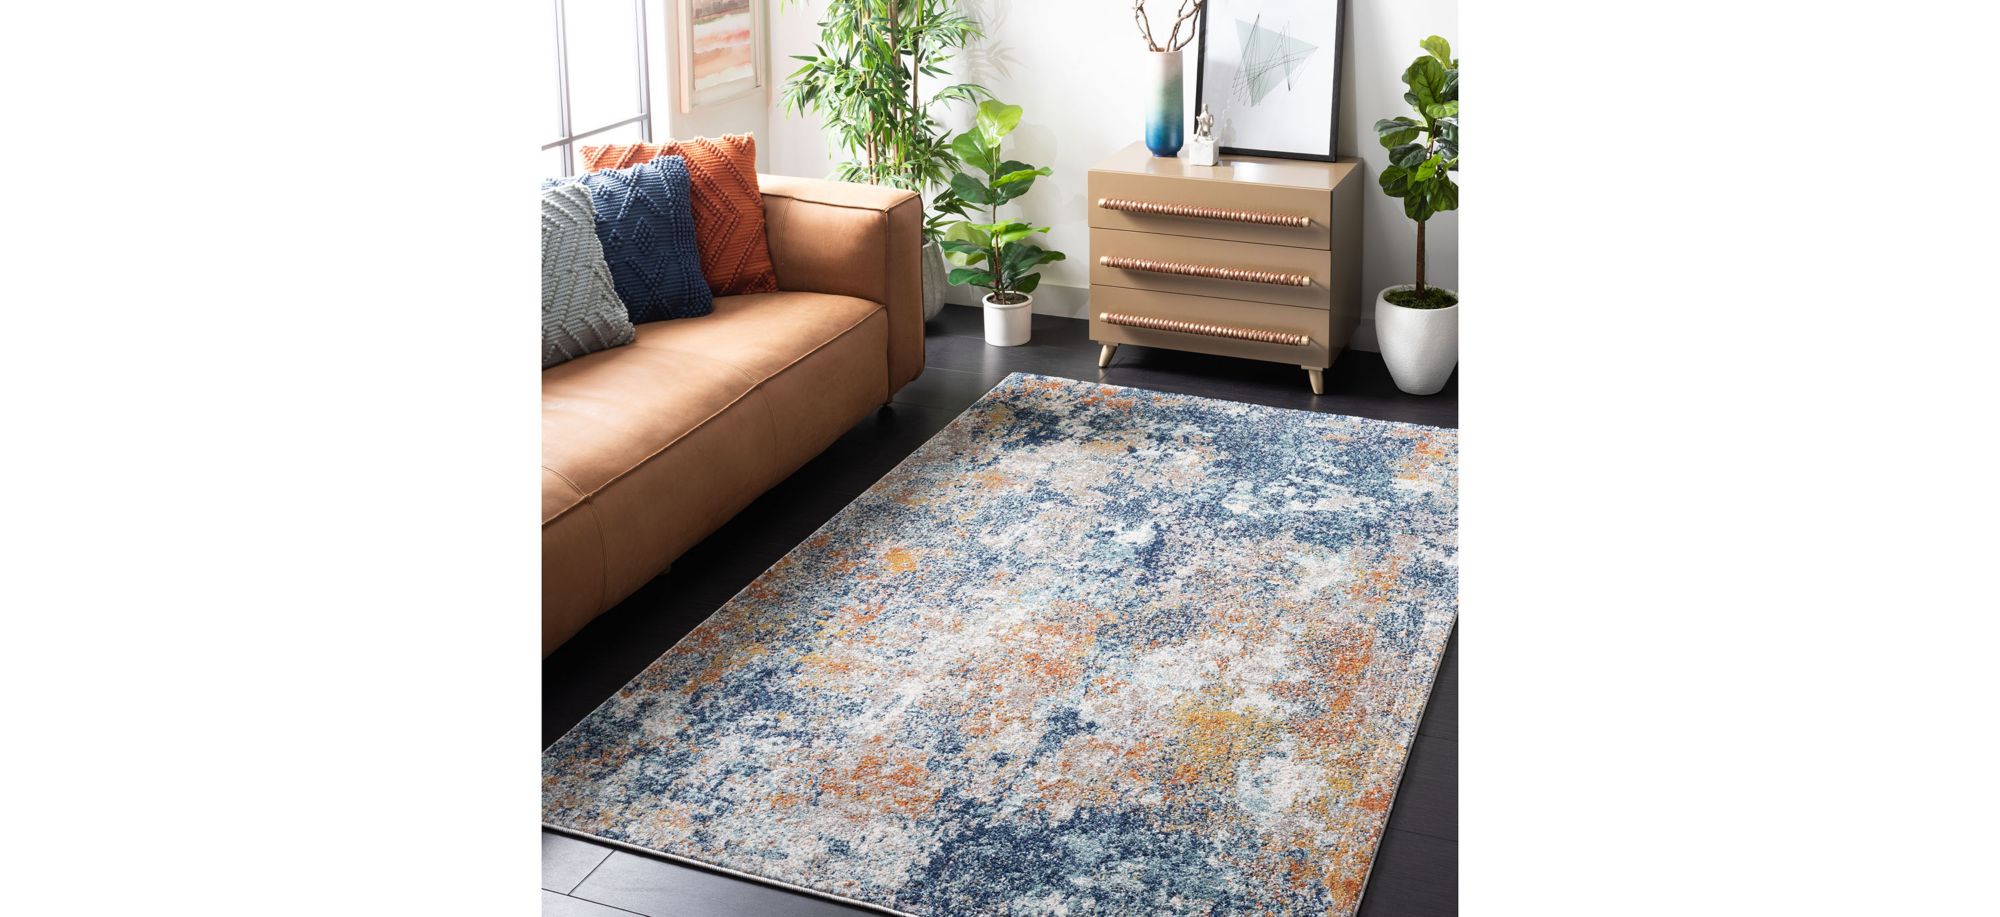 Iommi Area Rug in Navy & Gold by Safavieh